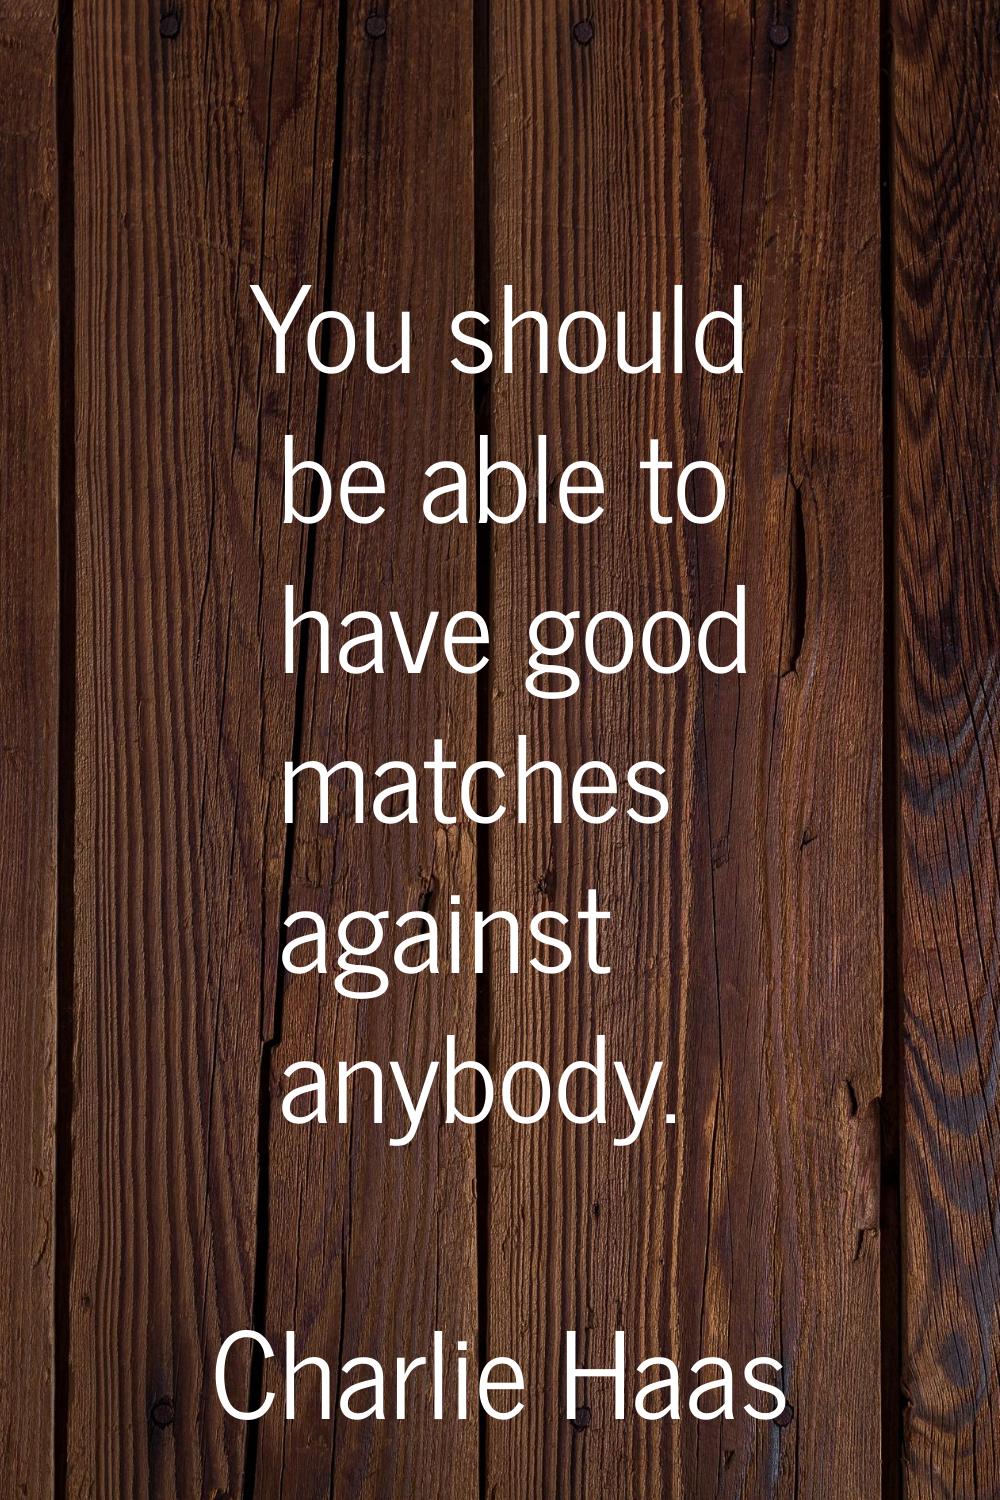 You should be able to have good matches against anybody.